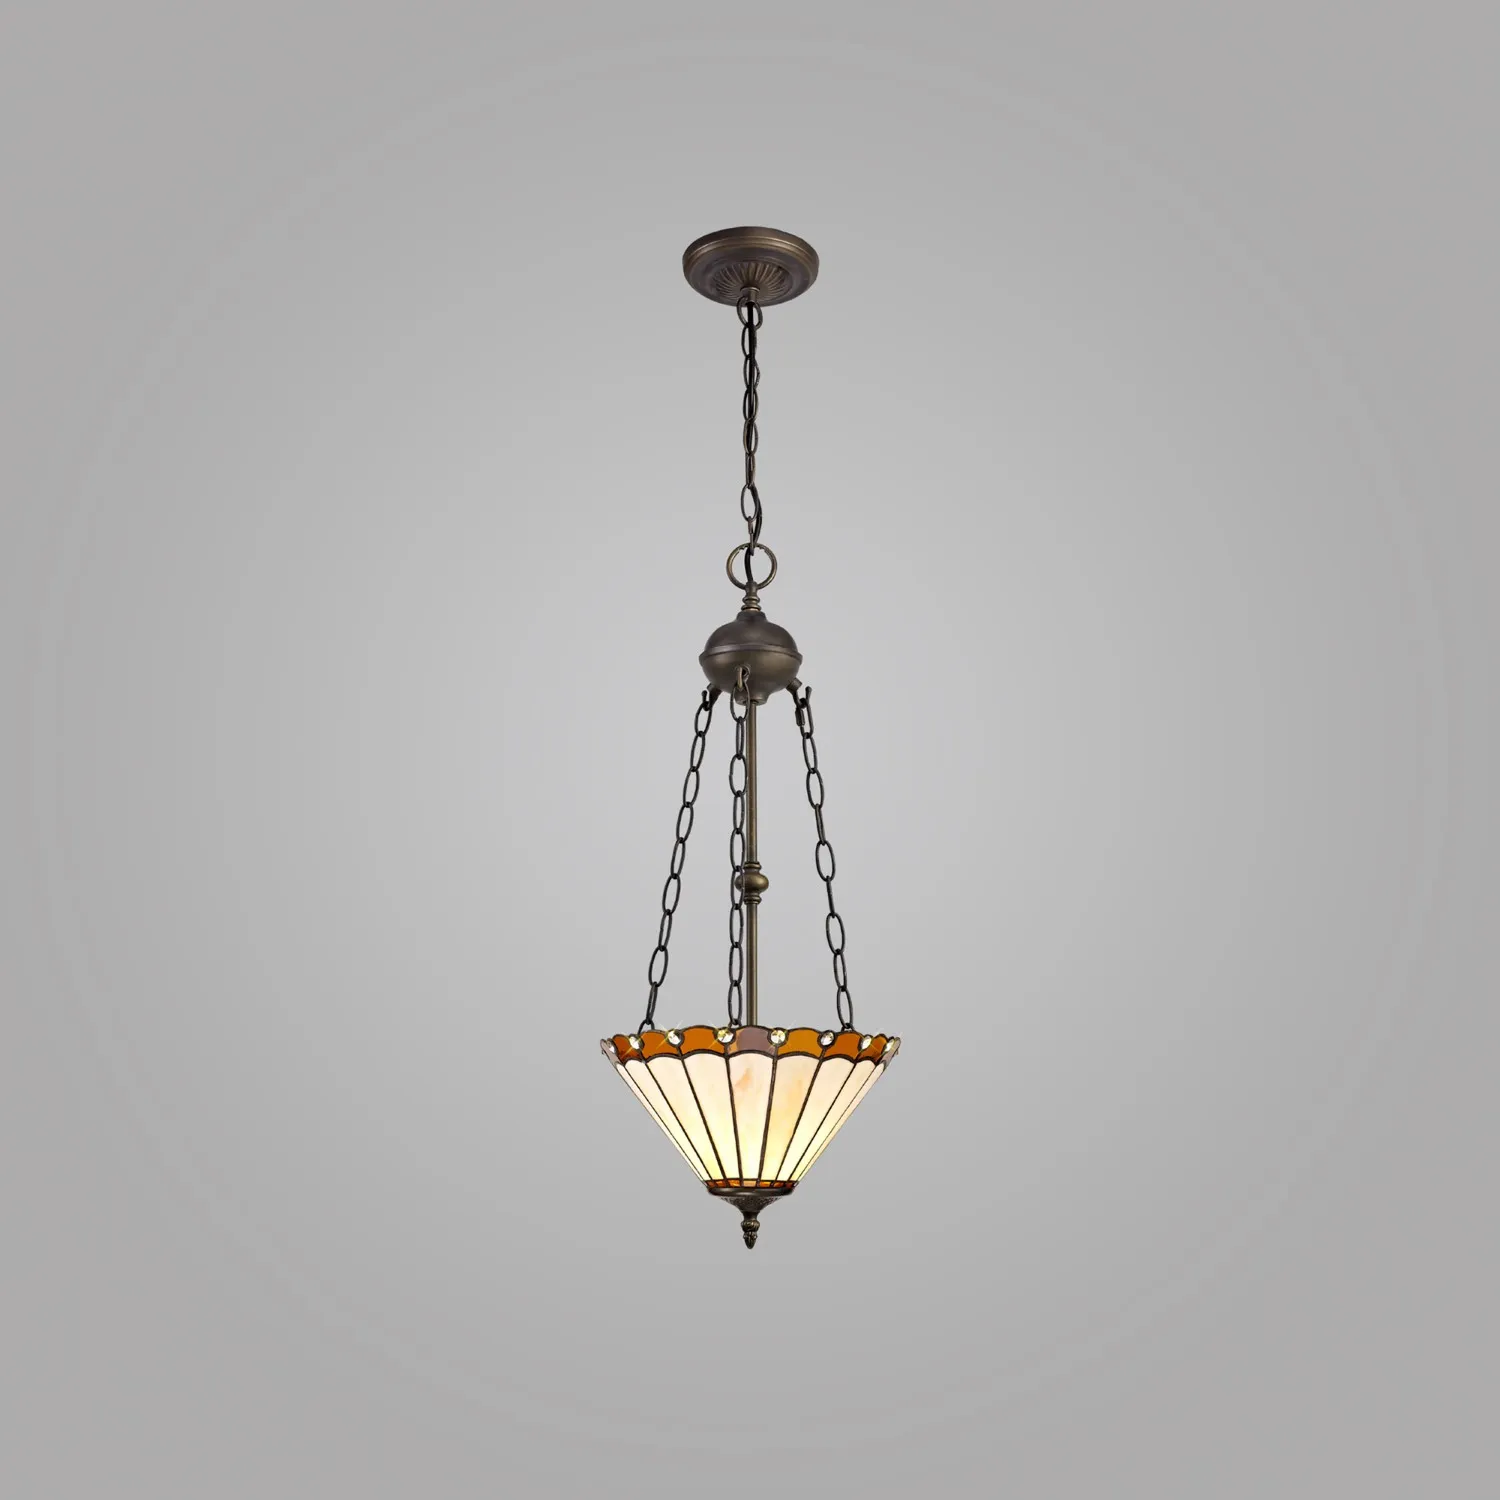 Ware 2 Light Uplighter Pendant E27 With 30cm Tiffany Shade, Amber Cream Crystal Aged Antique Brass